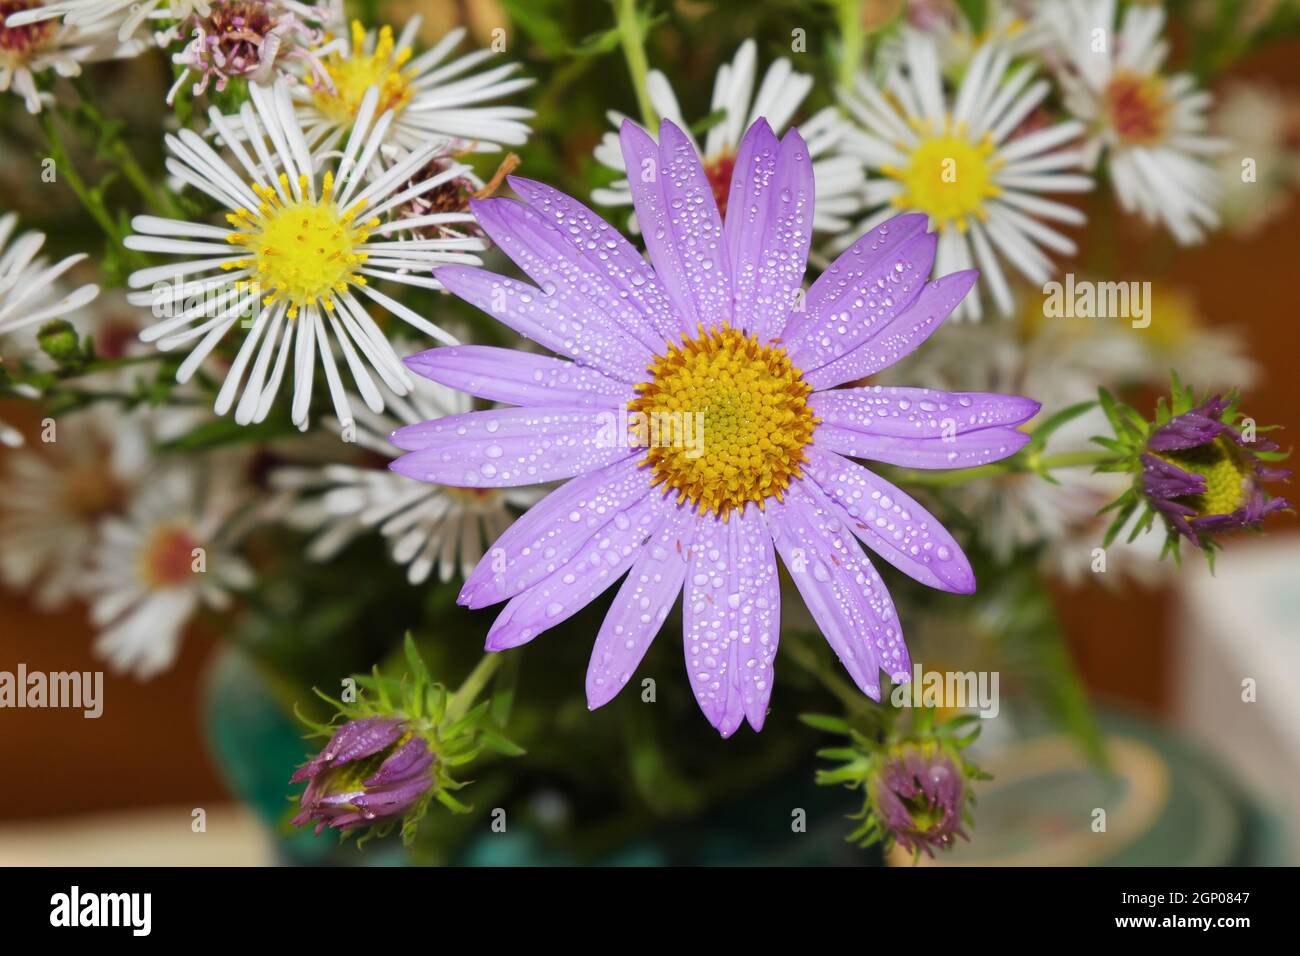 Oreostemma. Aster with blue petals covered with dew drops. Selective focus. Stock Photo